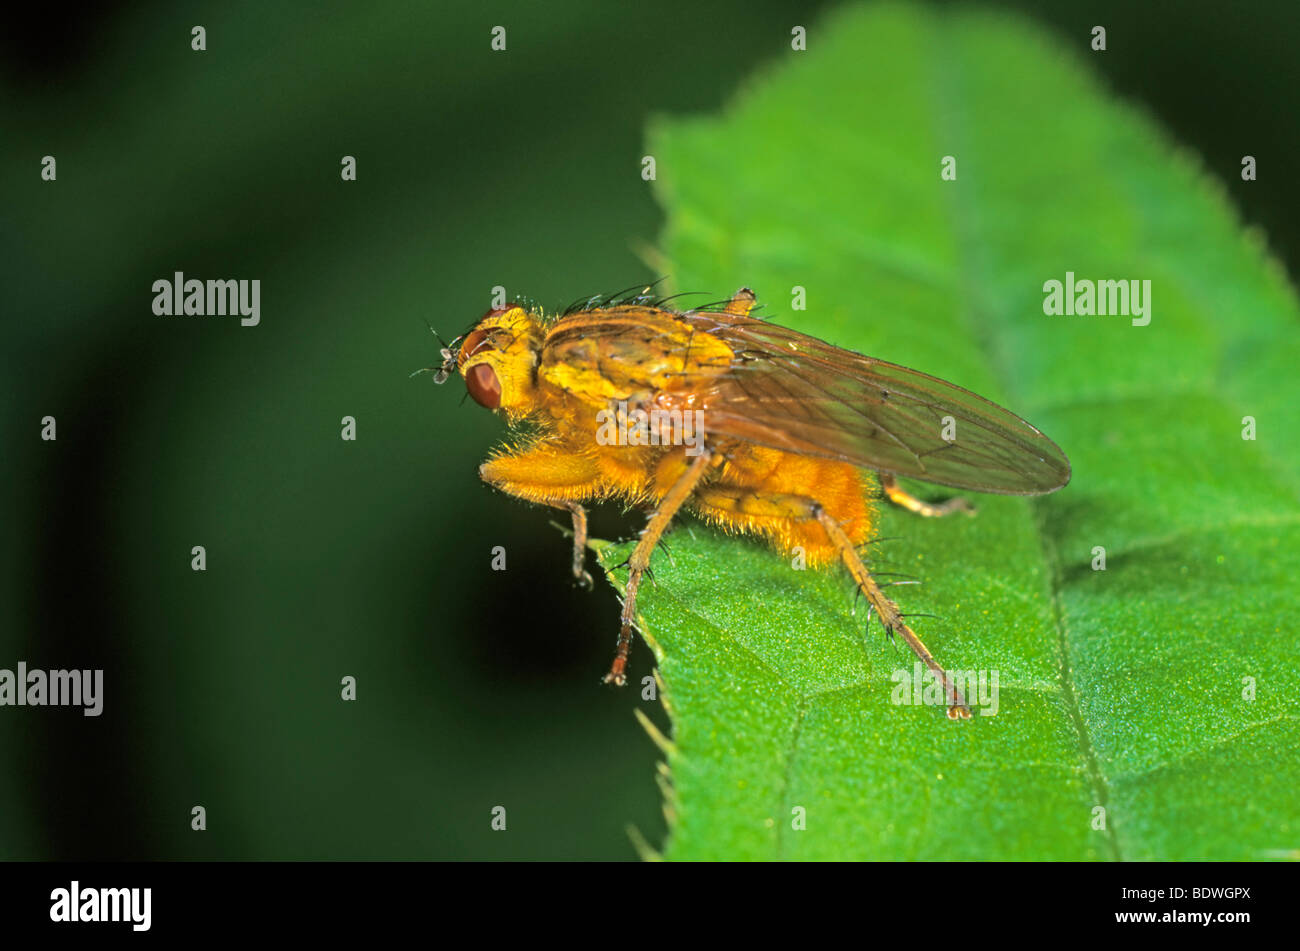 Common yellow dung fly (Scatophaga stercoraria) Stock Photo